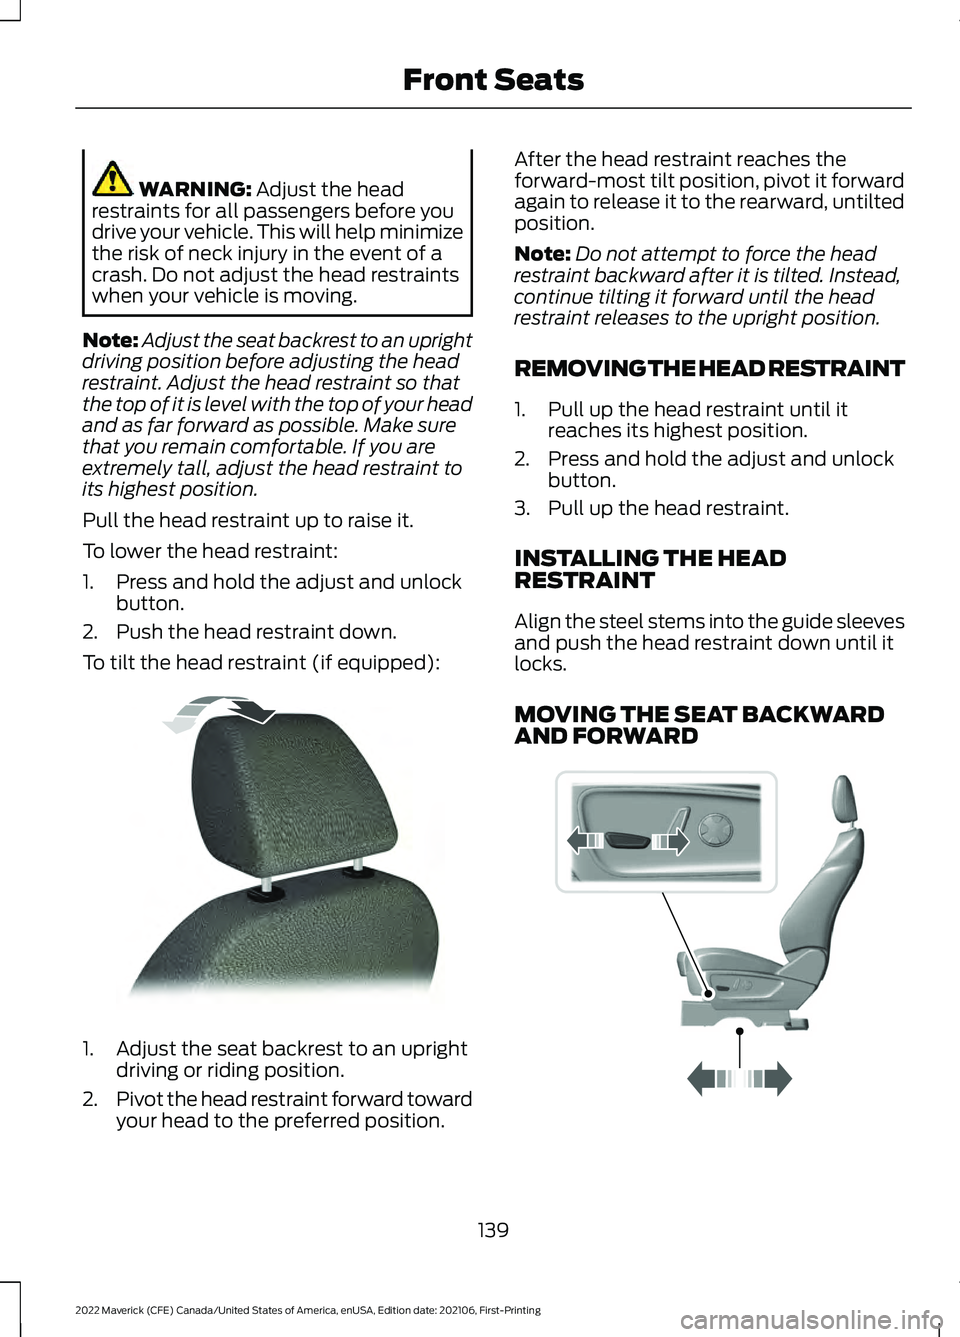 FORD MAVERICK 2022 User Guide WARNING: Adjust the head
restraints for all passengers before you
drive your vehicle. This will help minimize
the risk of neck injury in the event of a
crash. Do not adjust the head restraints
when yo